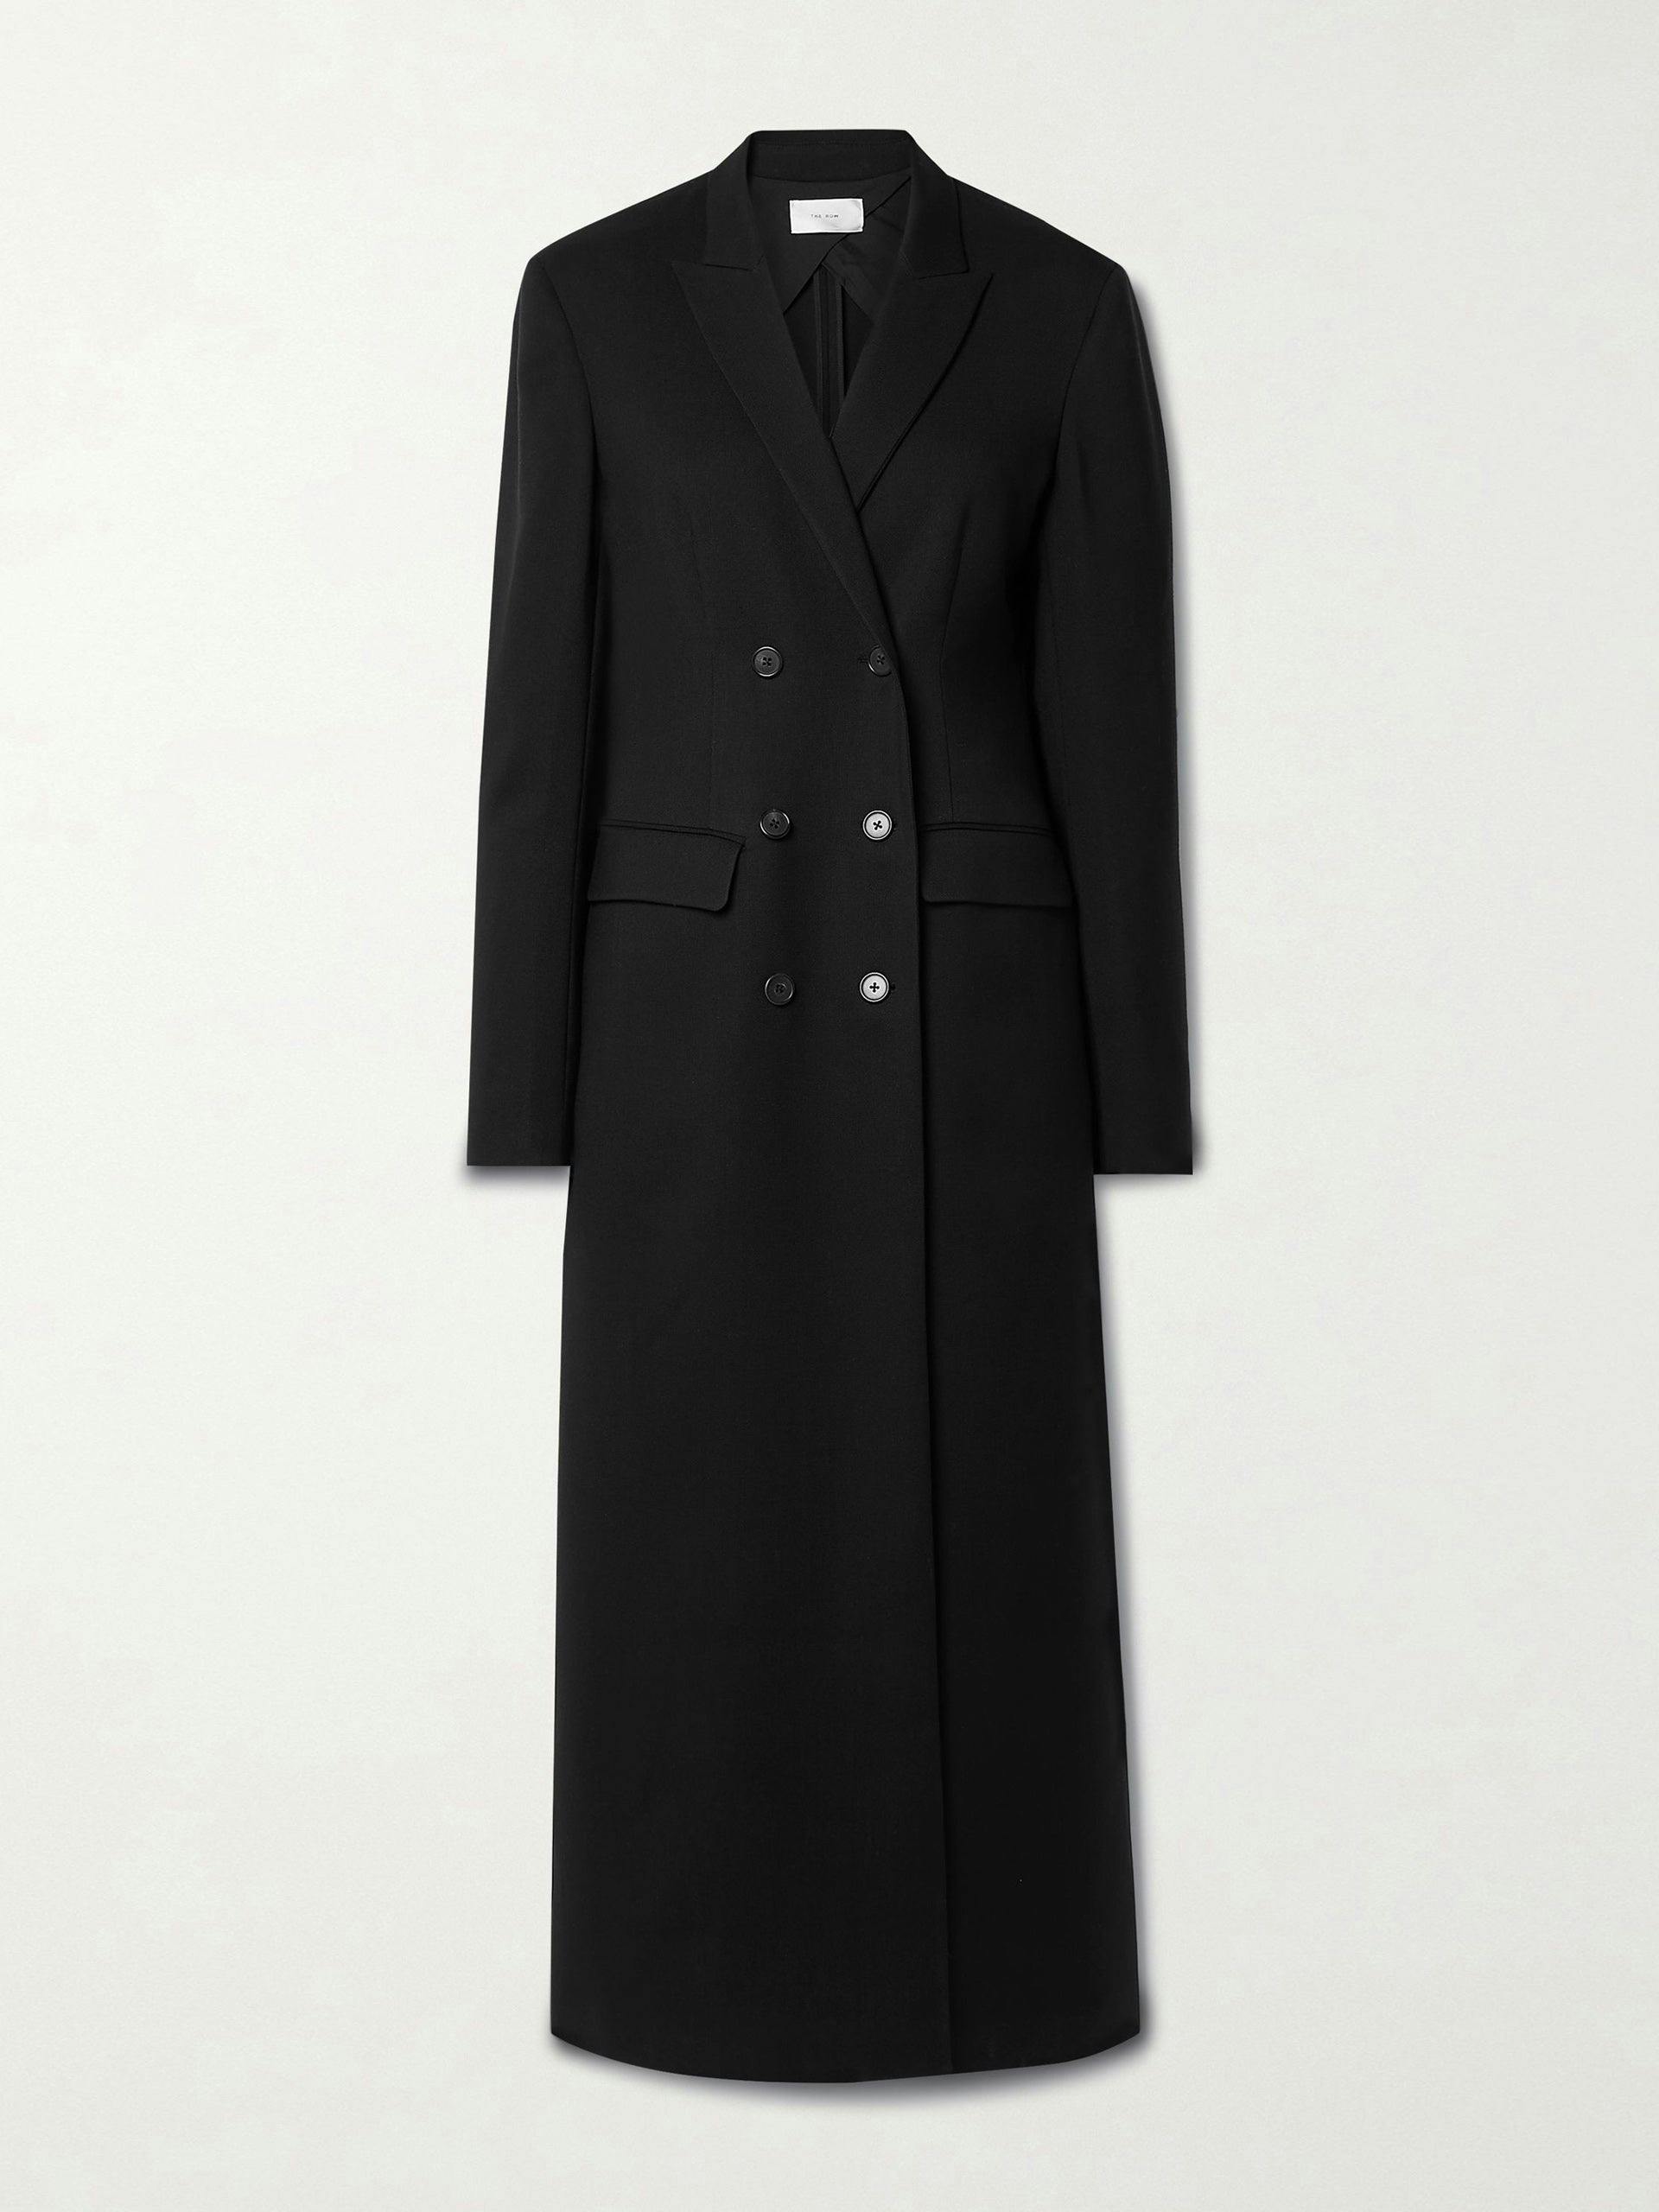 Black double-breasted wool and mohair-blend coat